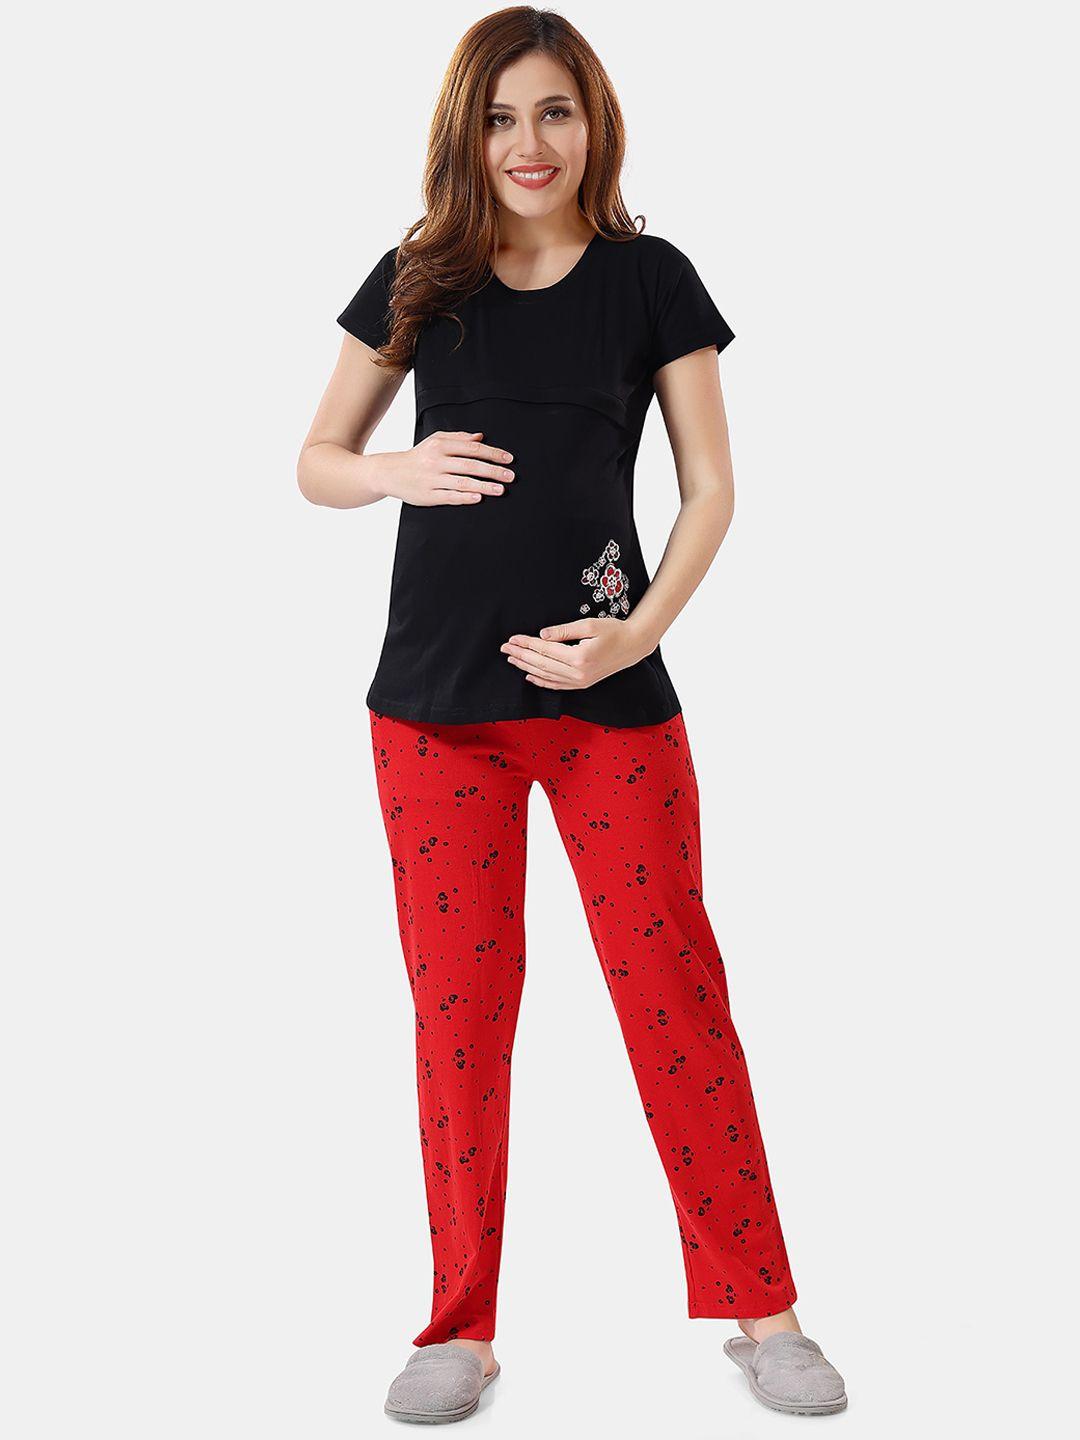 be you printed maternity night suit